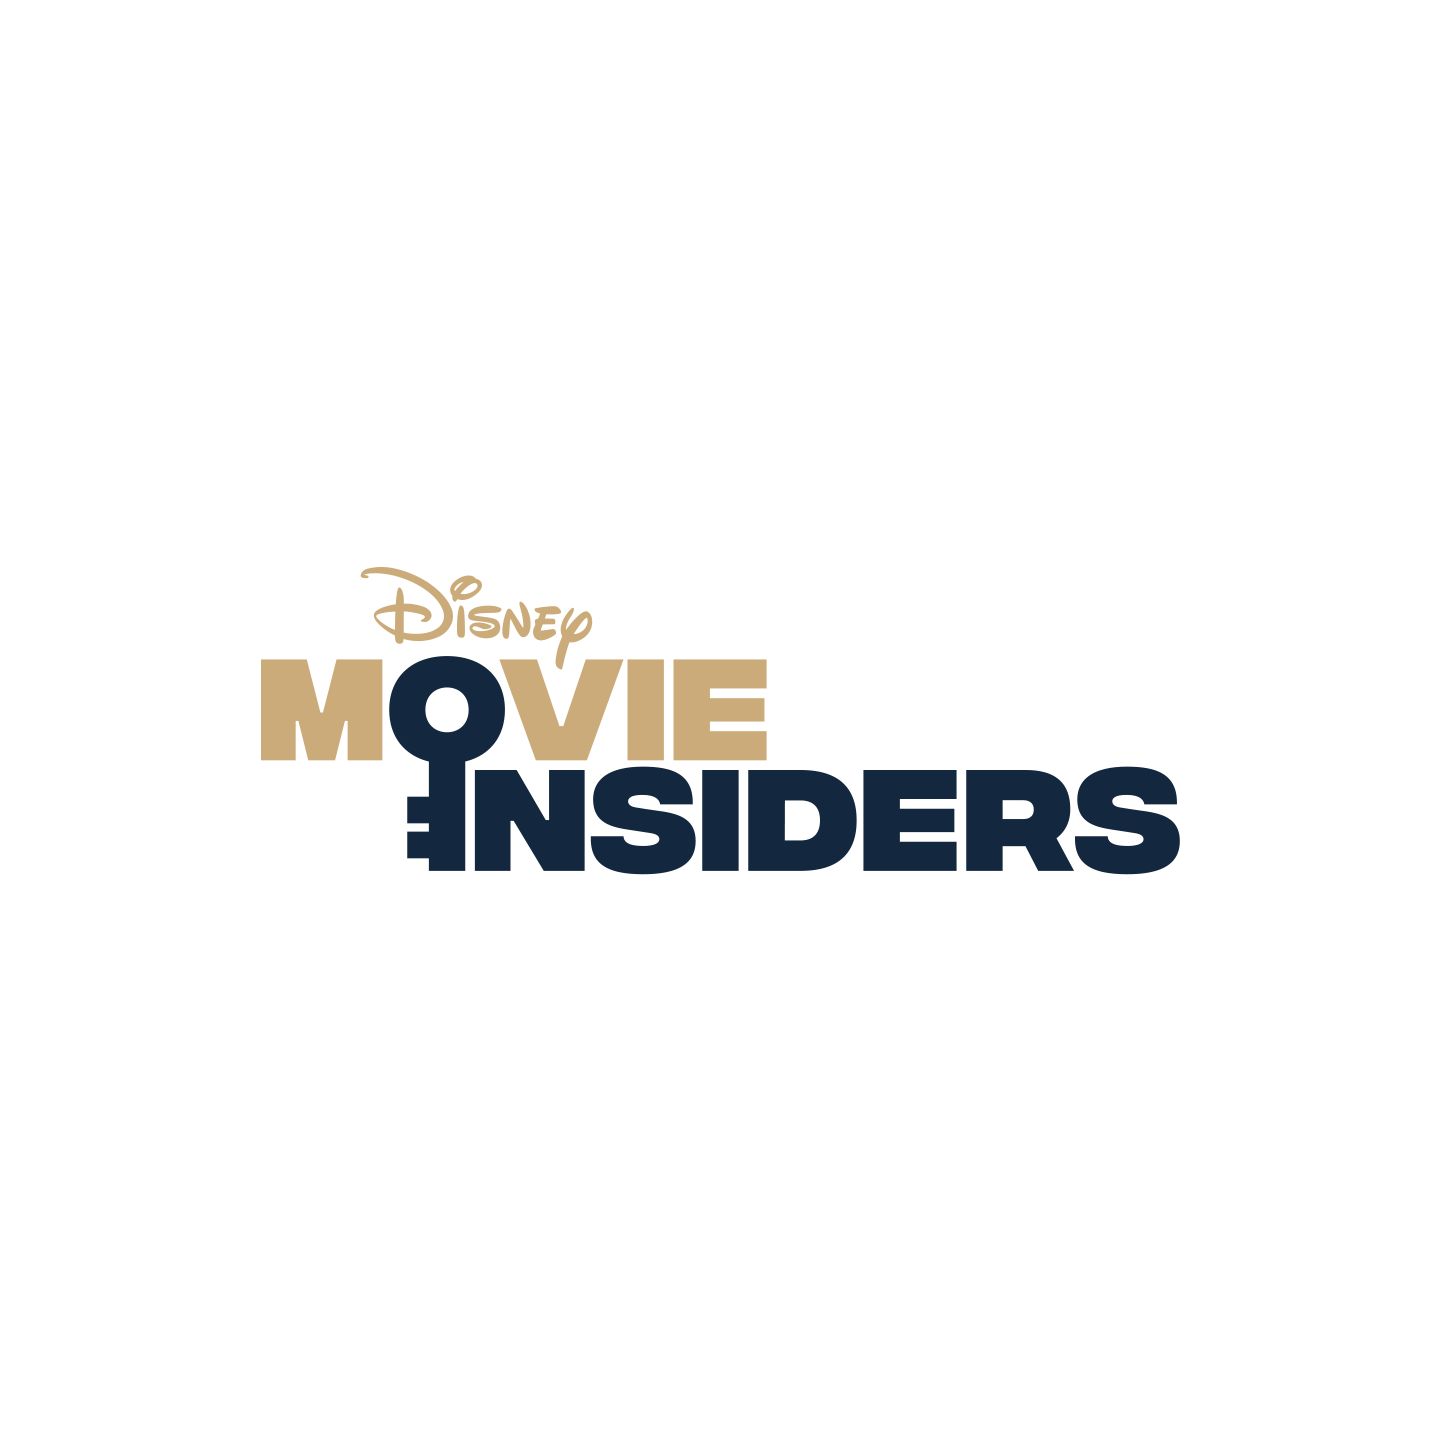 Disney Movie Insiders Presents - TURNING RED - Director Domee Shi joins us for a stu-panda-ous new podcast episode. LISTEN NOW